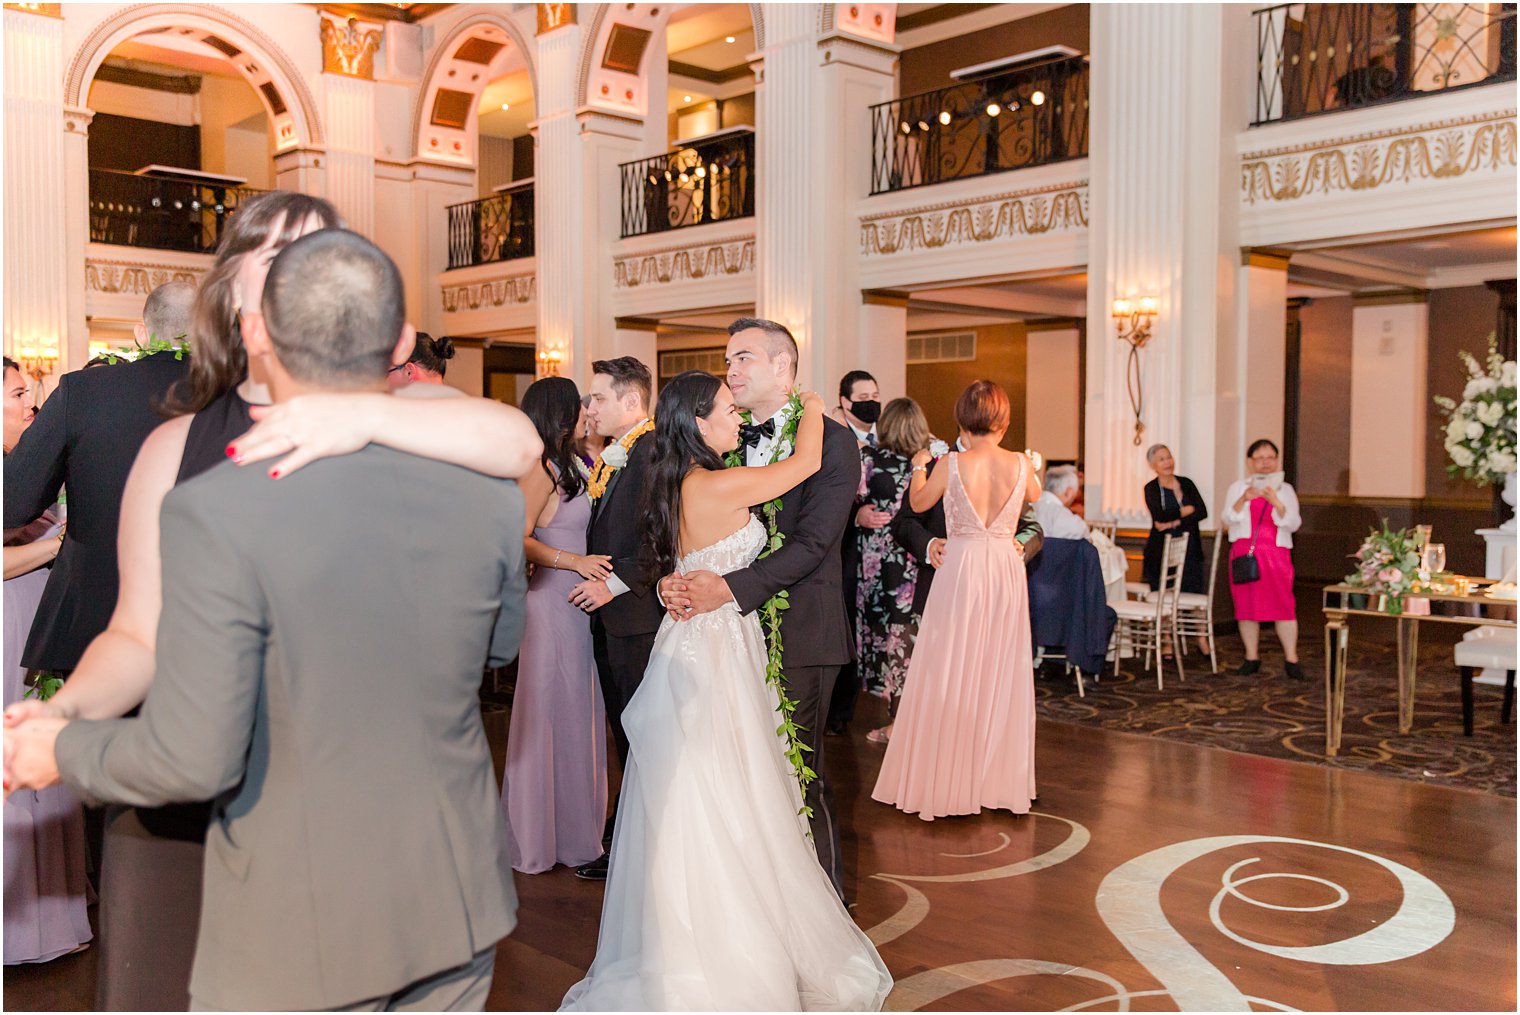 newlyweds dance with wedding guests during reception at the Ballroom at the Ben